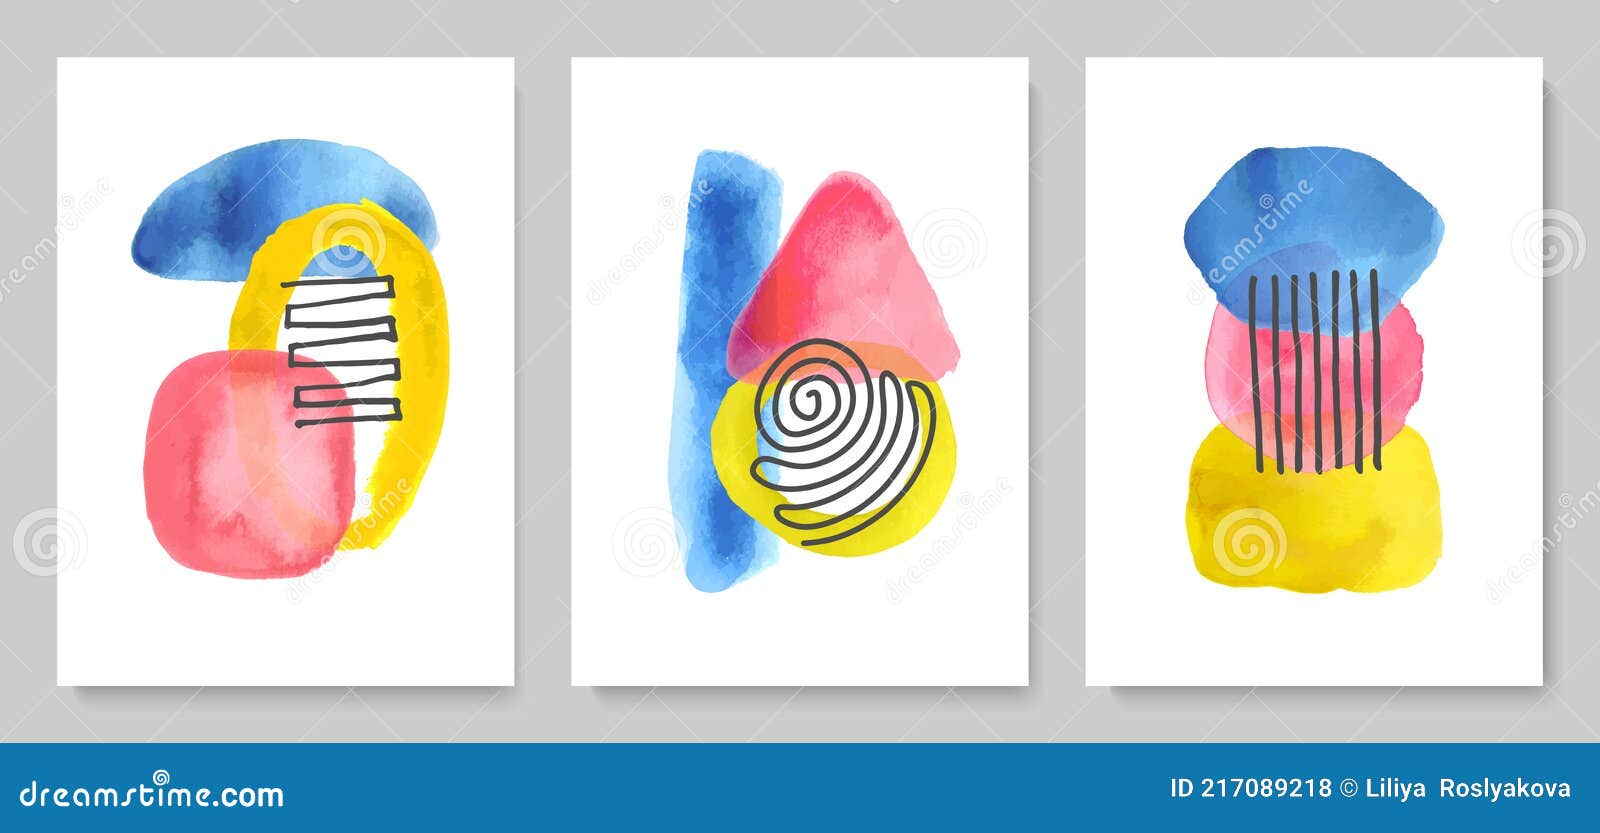 Set of abstract modern creative posters with watercolor shapes and lines. Hand drawn style. Minimalist design for background, wallpaper, wall decor, brochure, print, card. Vector illustration.